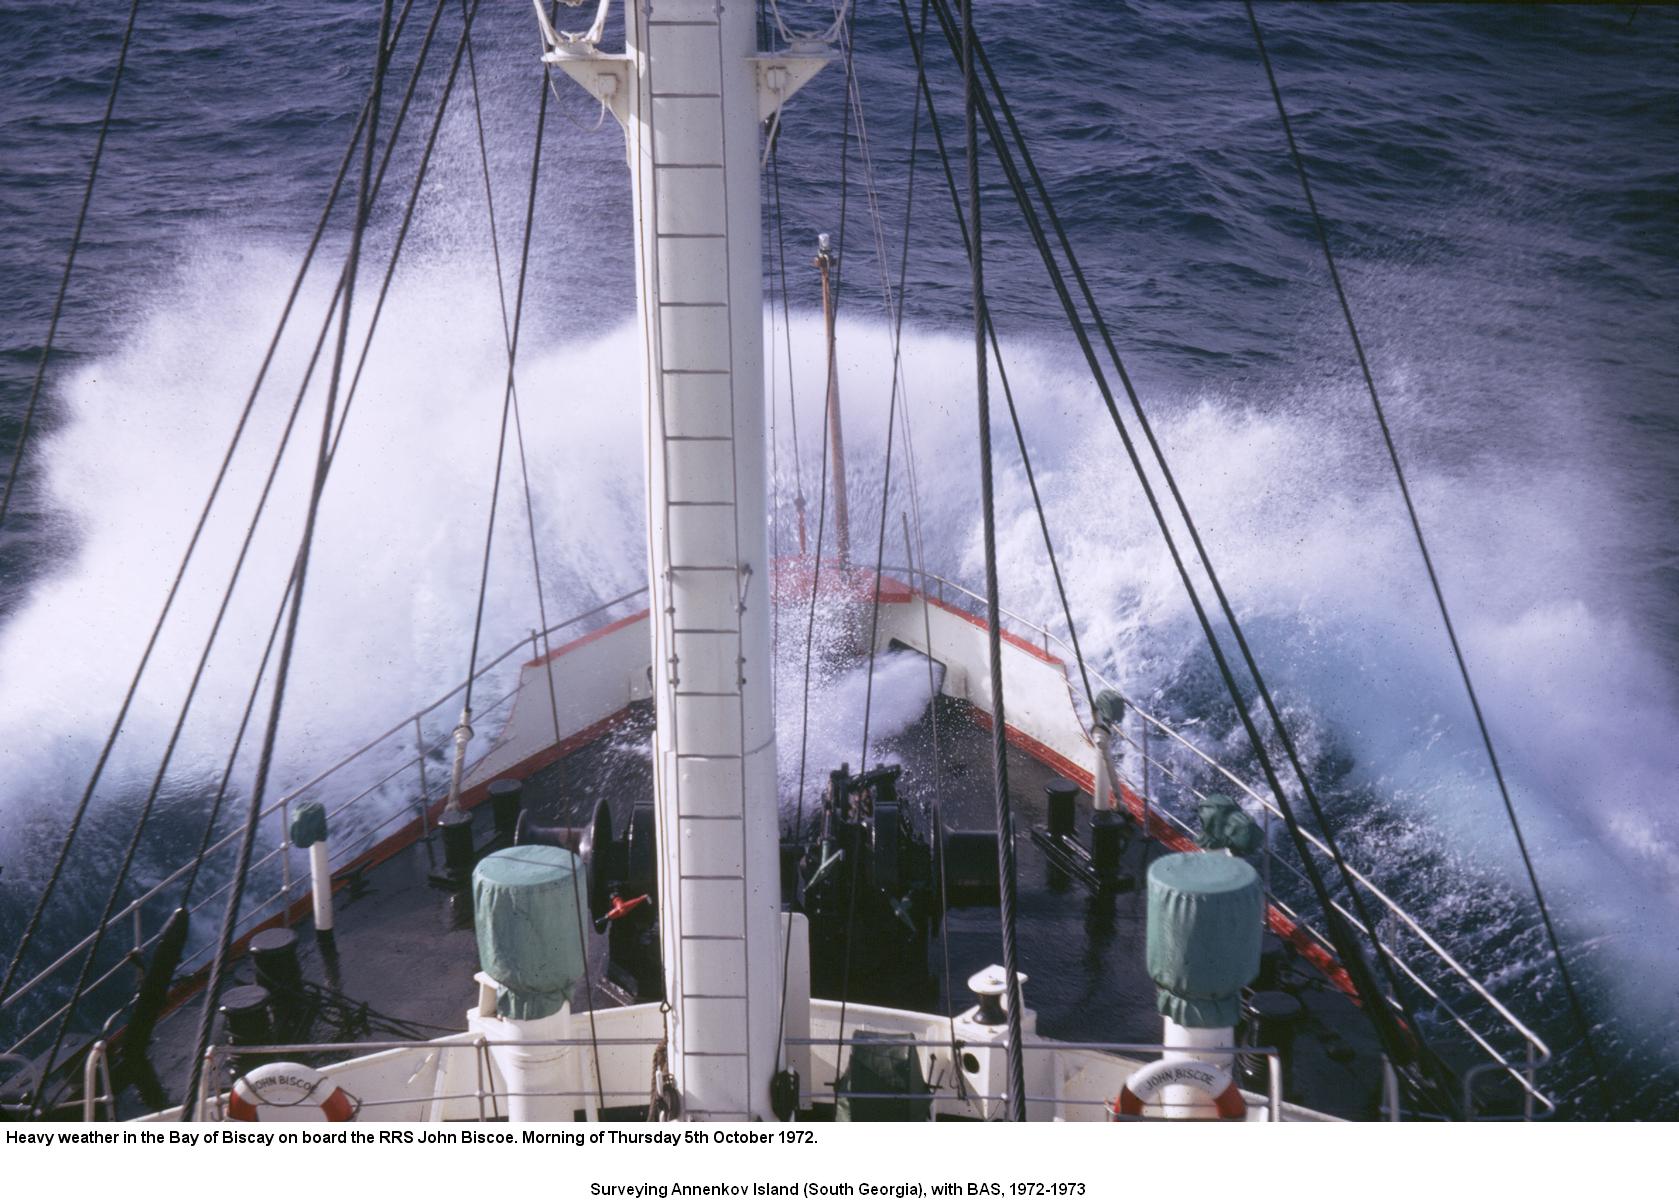 Heavy weather in the Bay of Biscay, 5th October 1972.